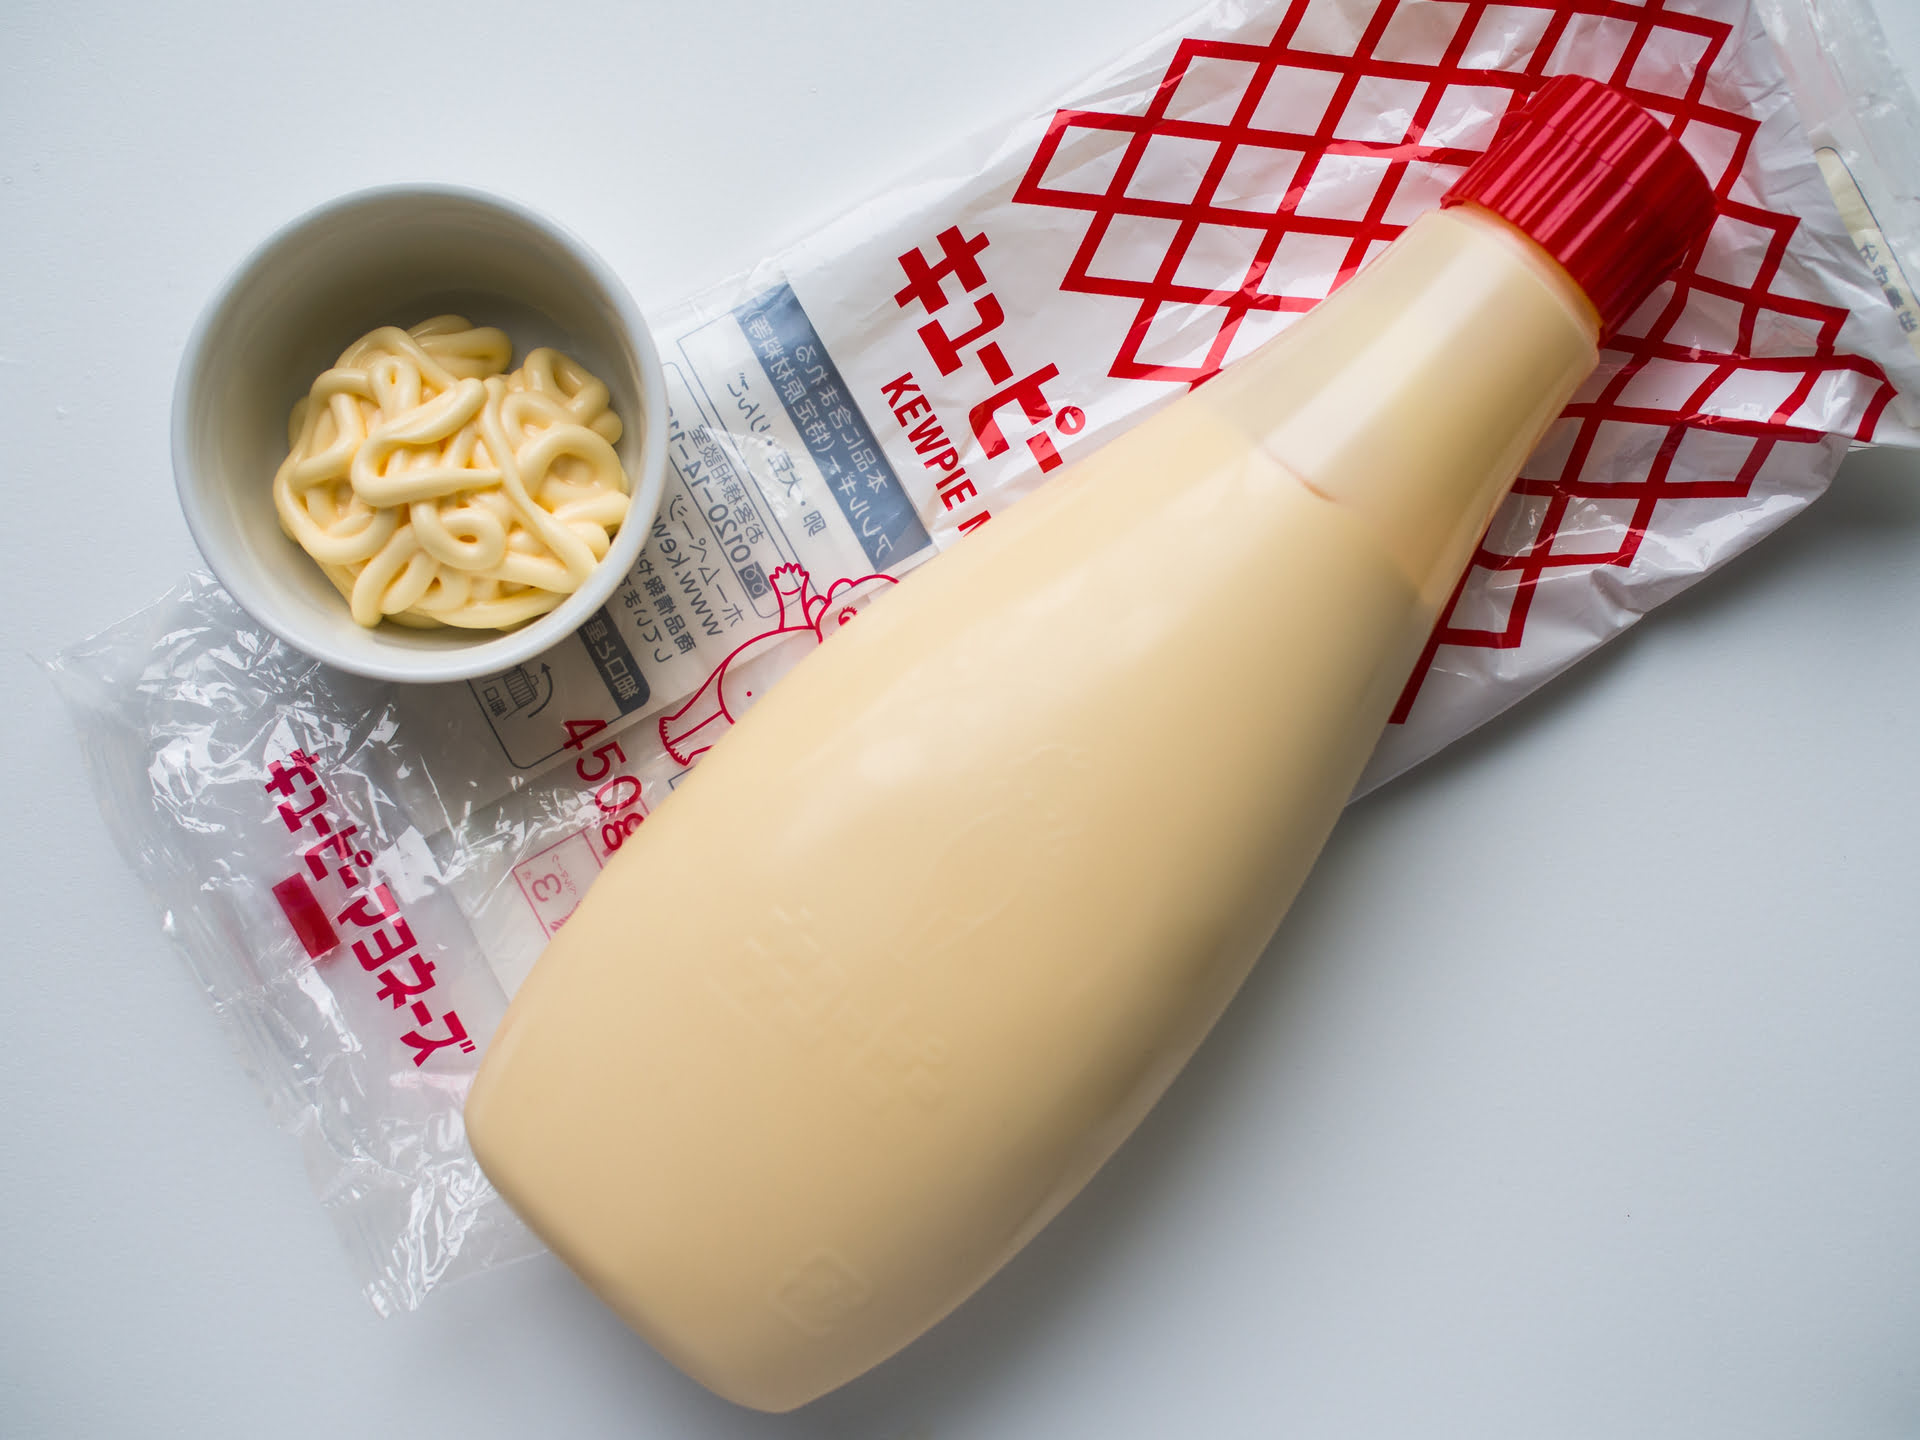 How To Store Kewpie Mayonnaise After Opening